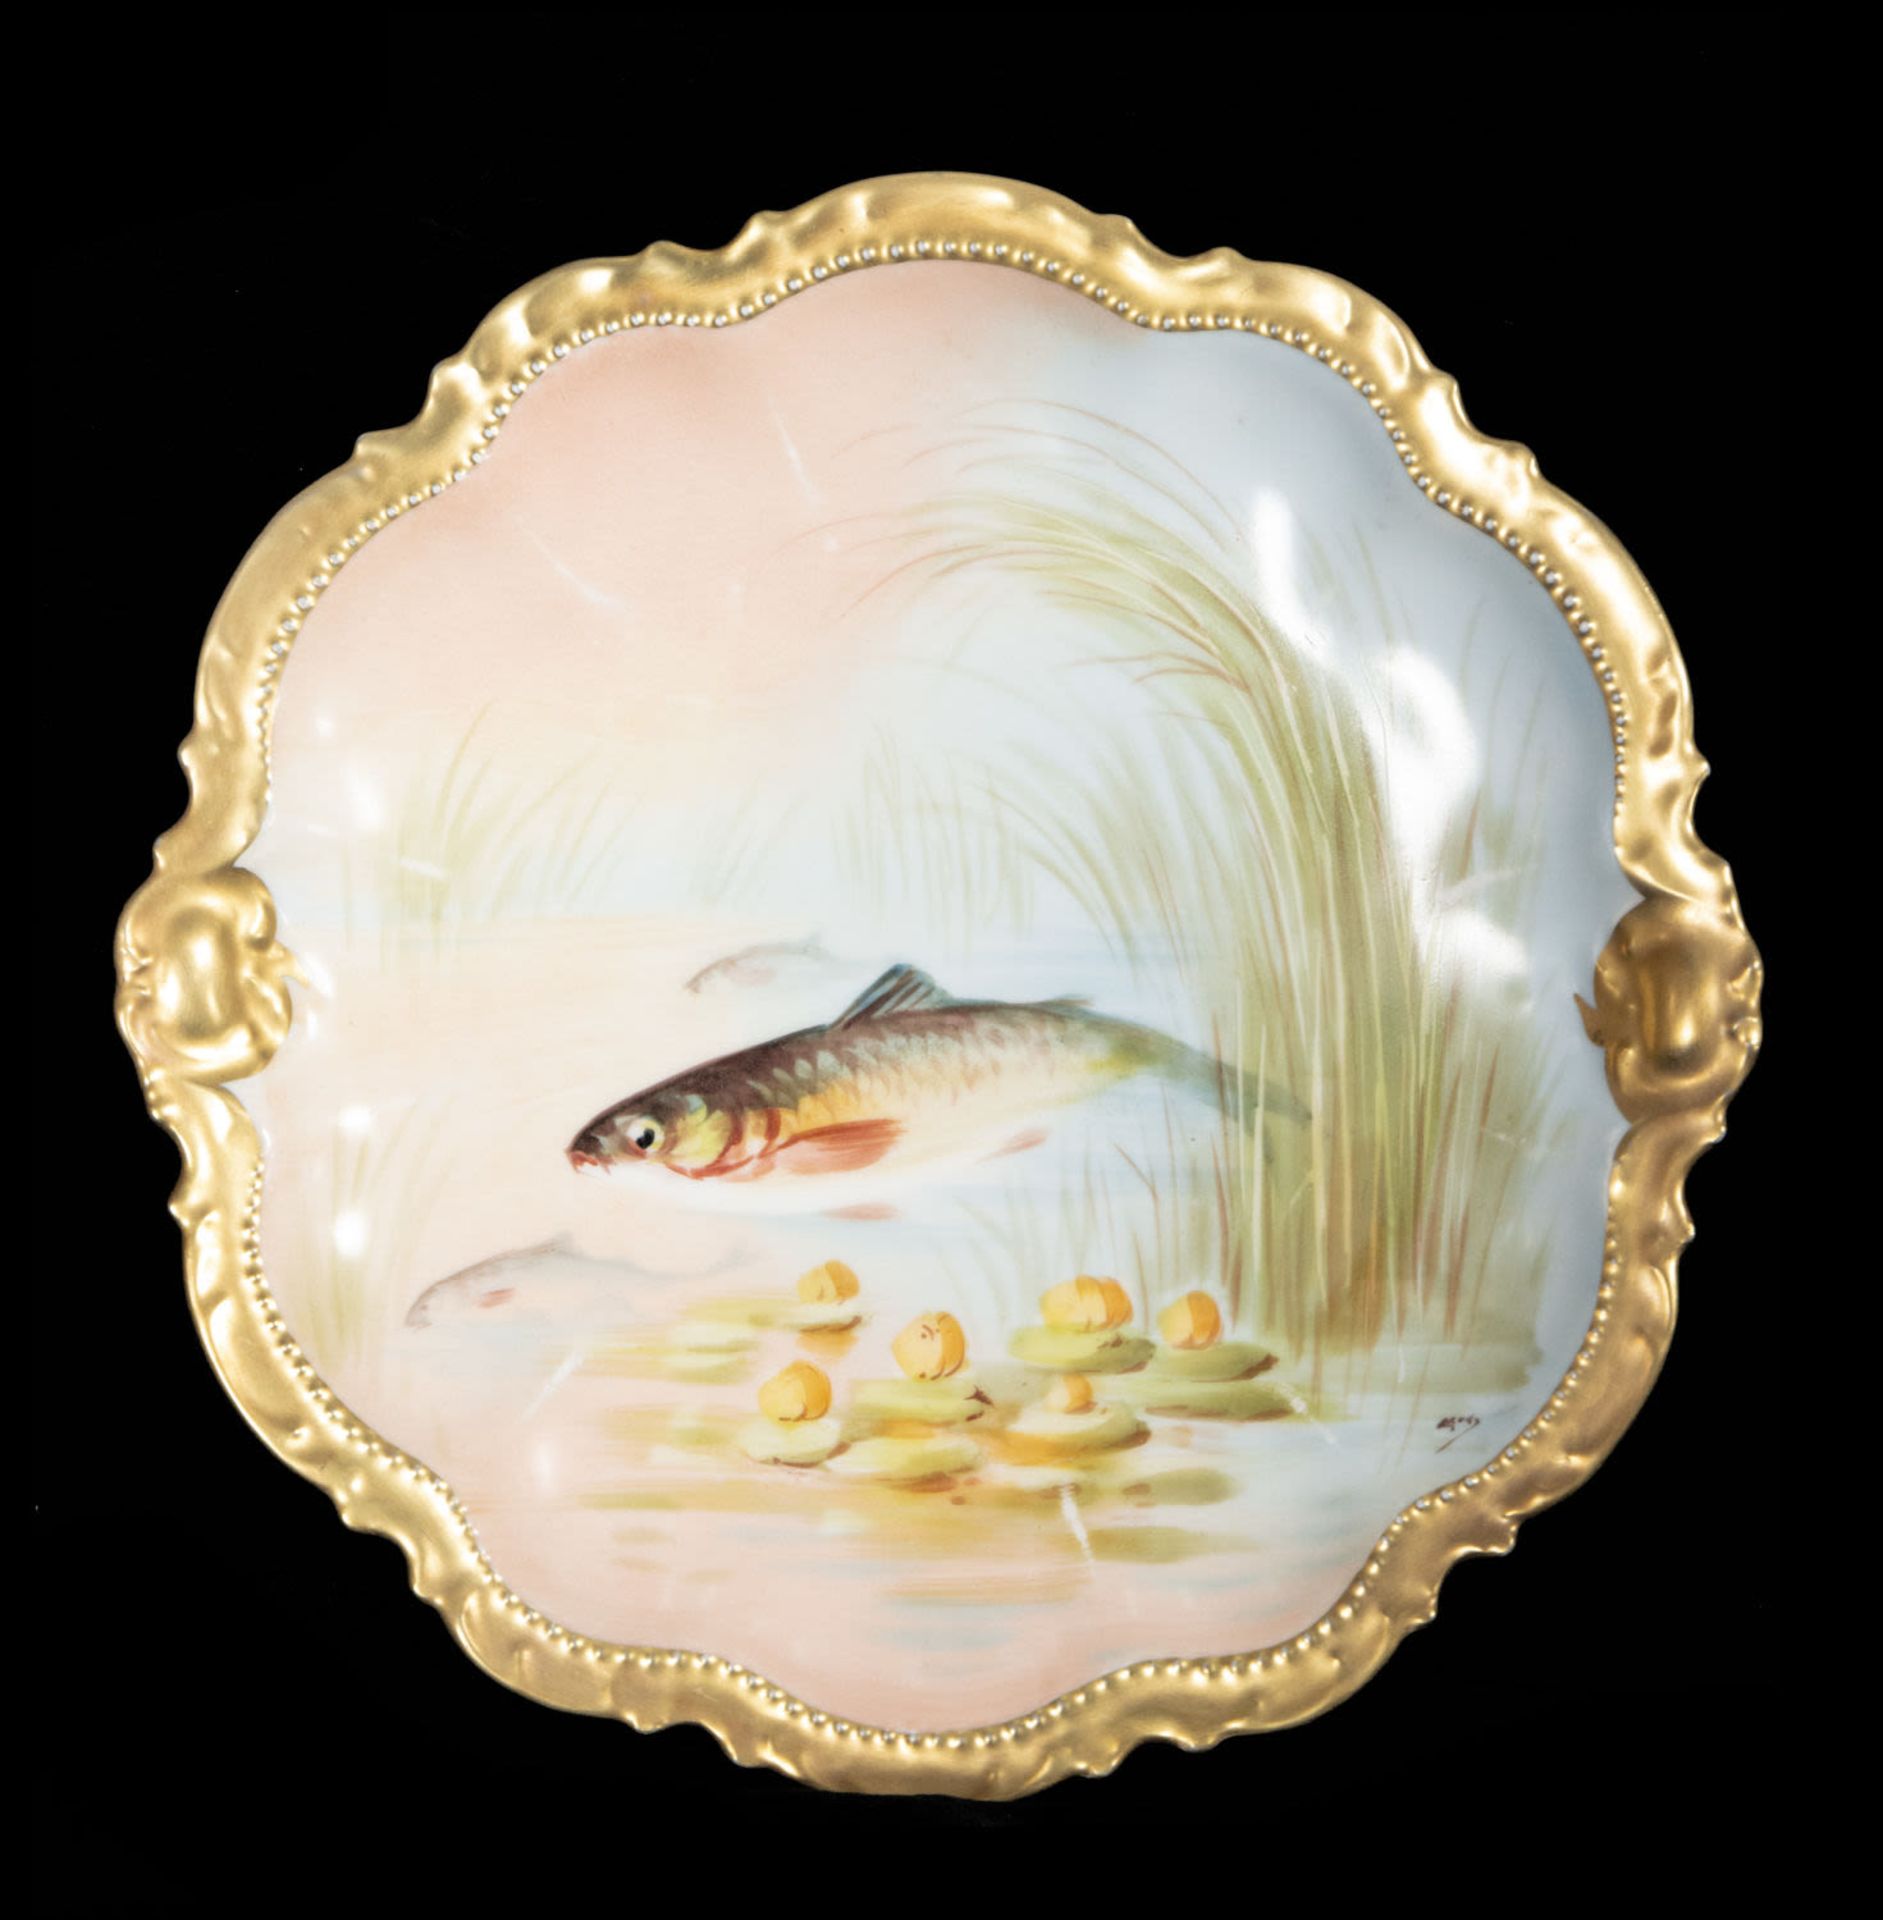 19th Century Limoges Porcelain Fish Dinnerware Set by the Count of Artois, 19th Century - Image 9 of 12